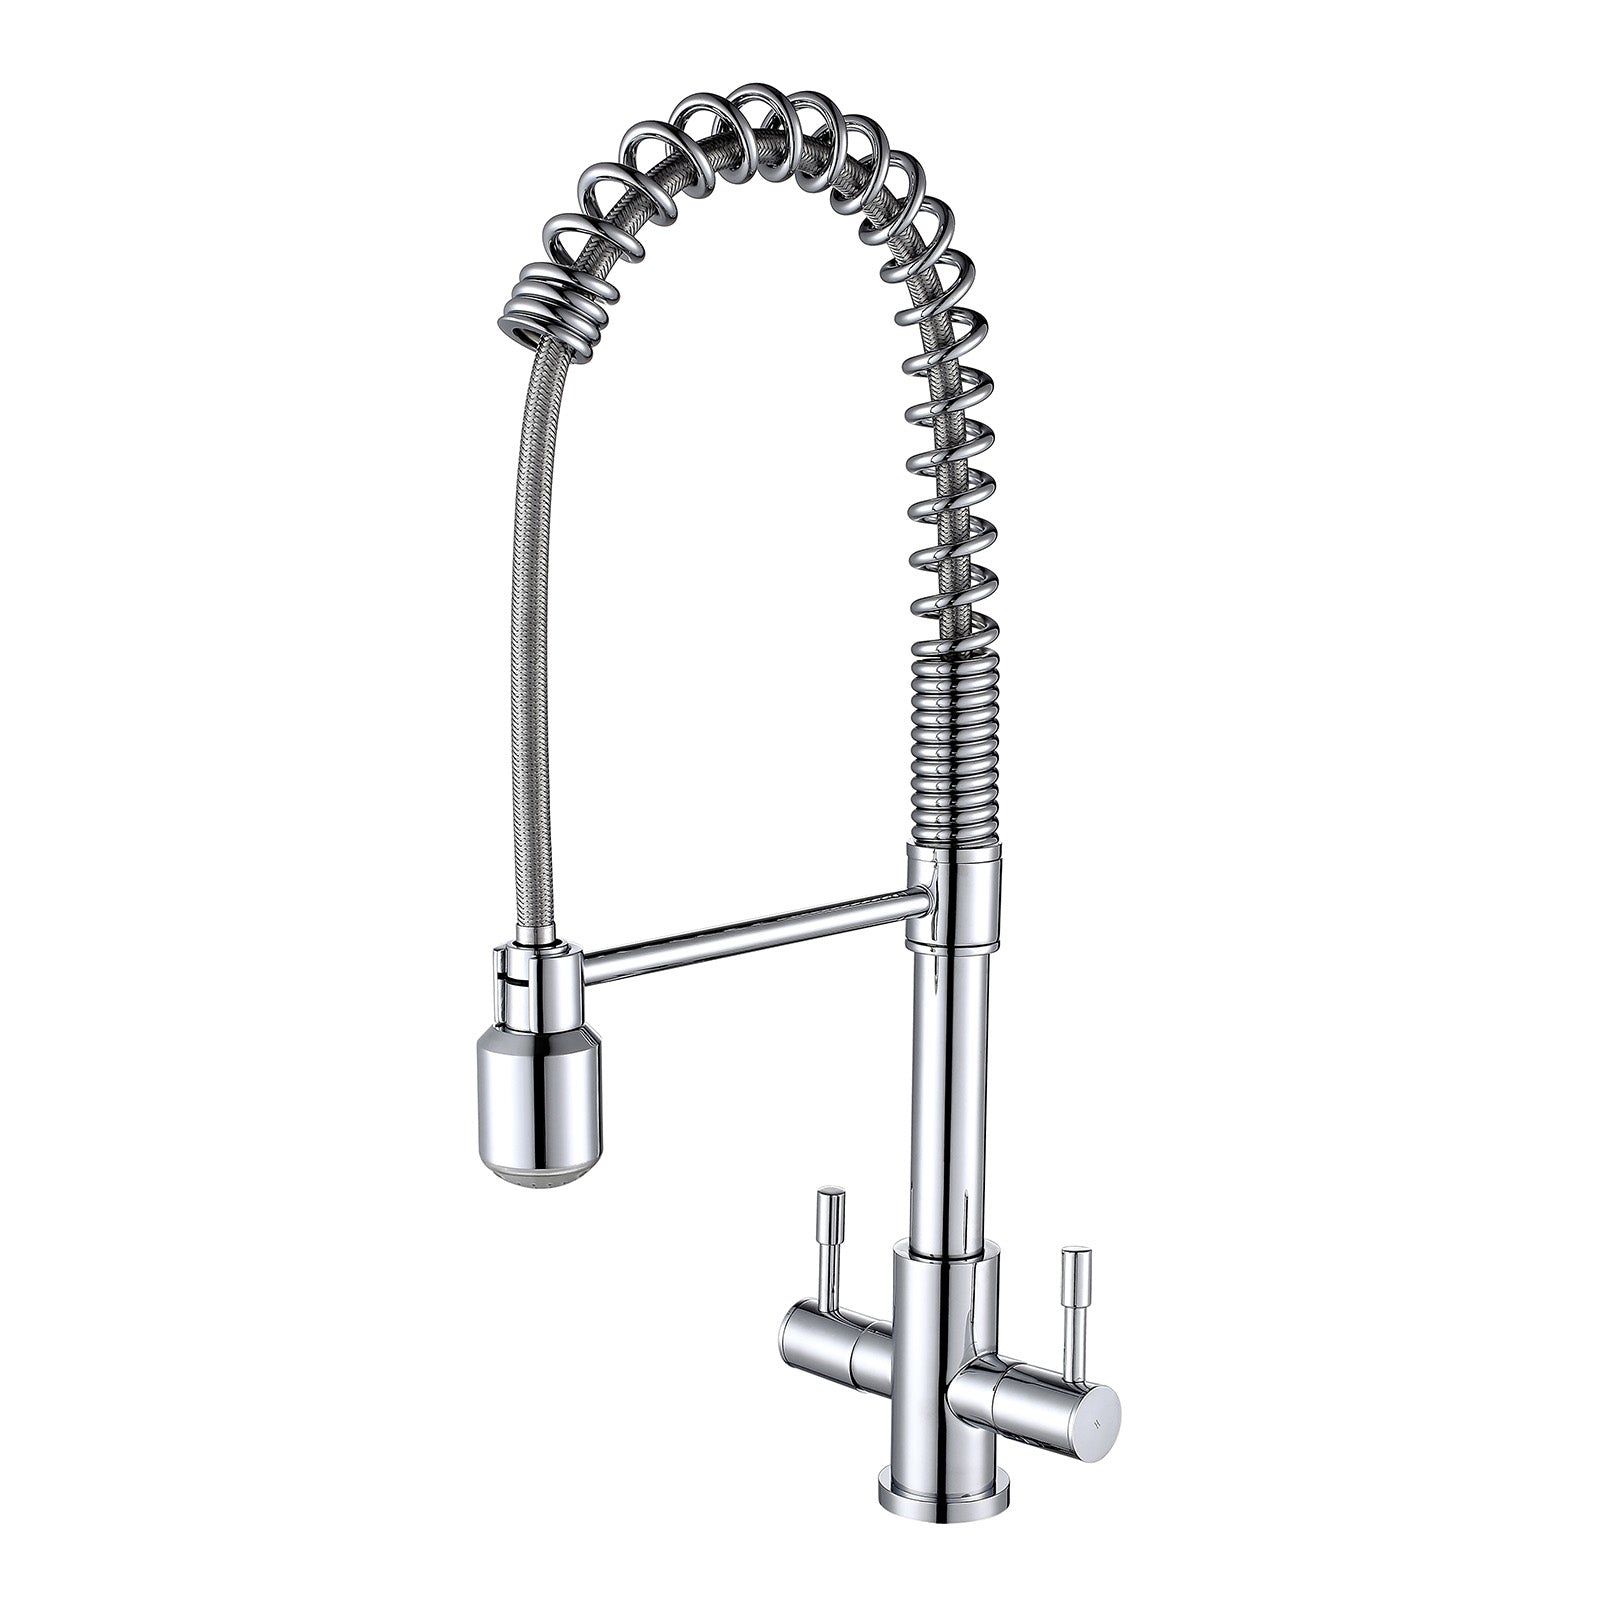 Modern Dual Lever Pull Out Kitchen Mixer Tap Faucet Chrome